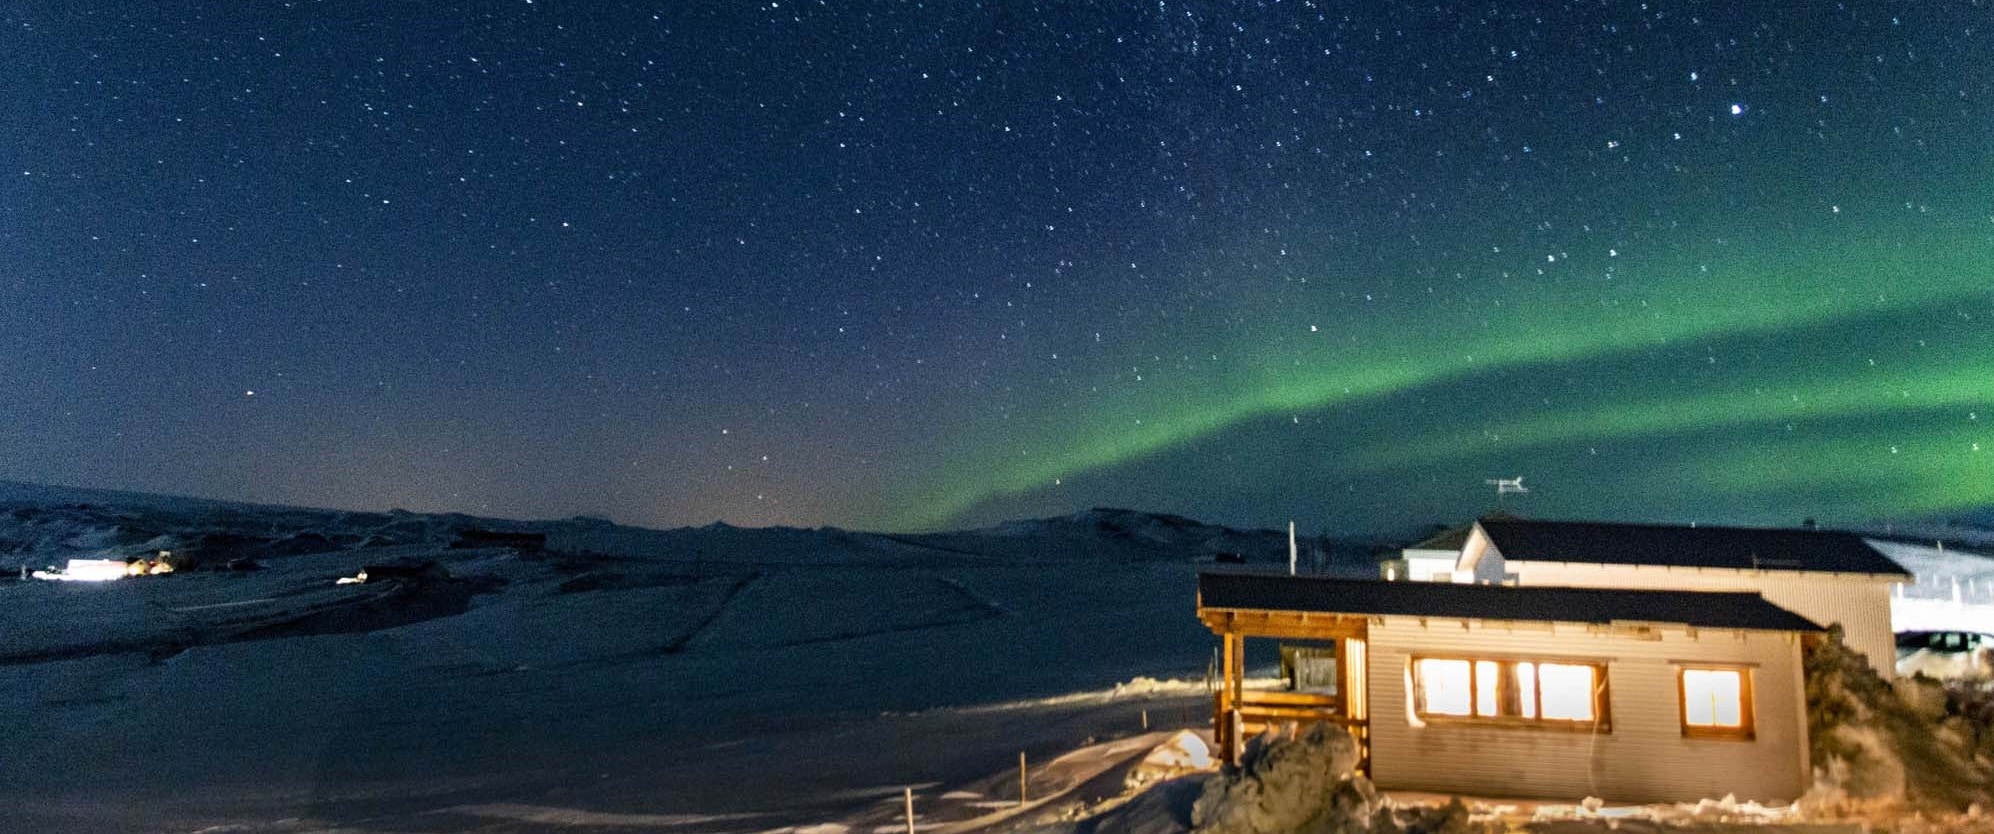 How To Find The Best Place To See Northern Lights In Iceland?